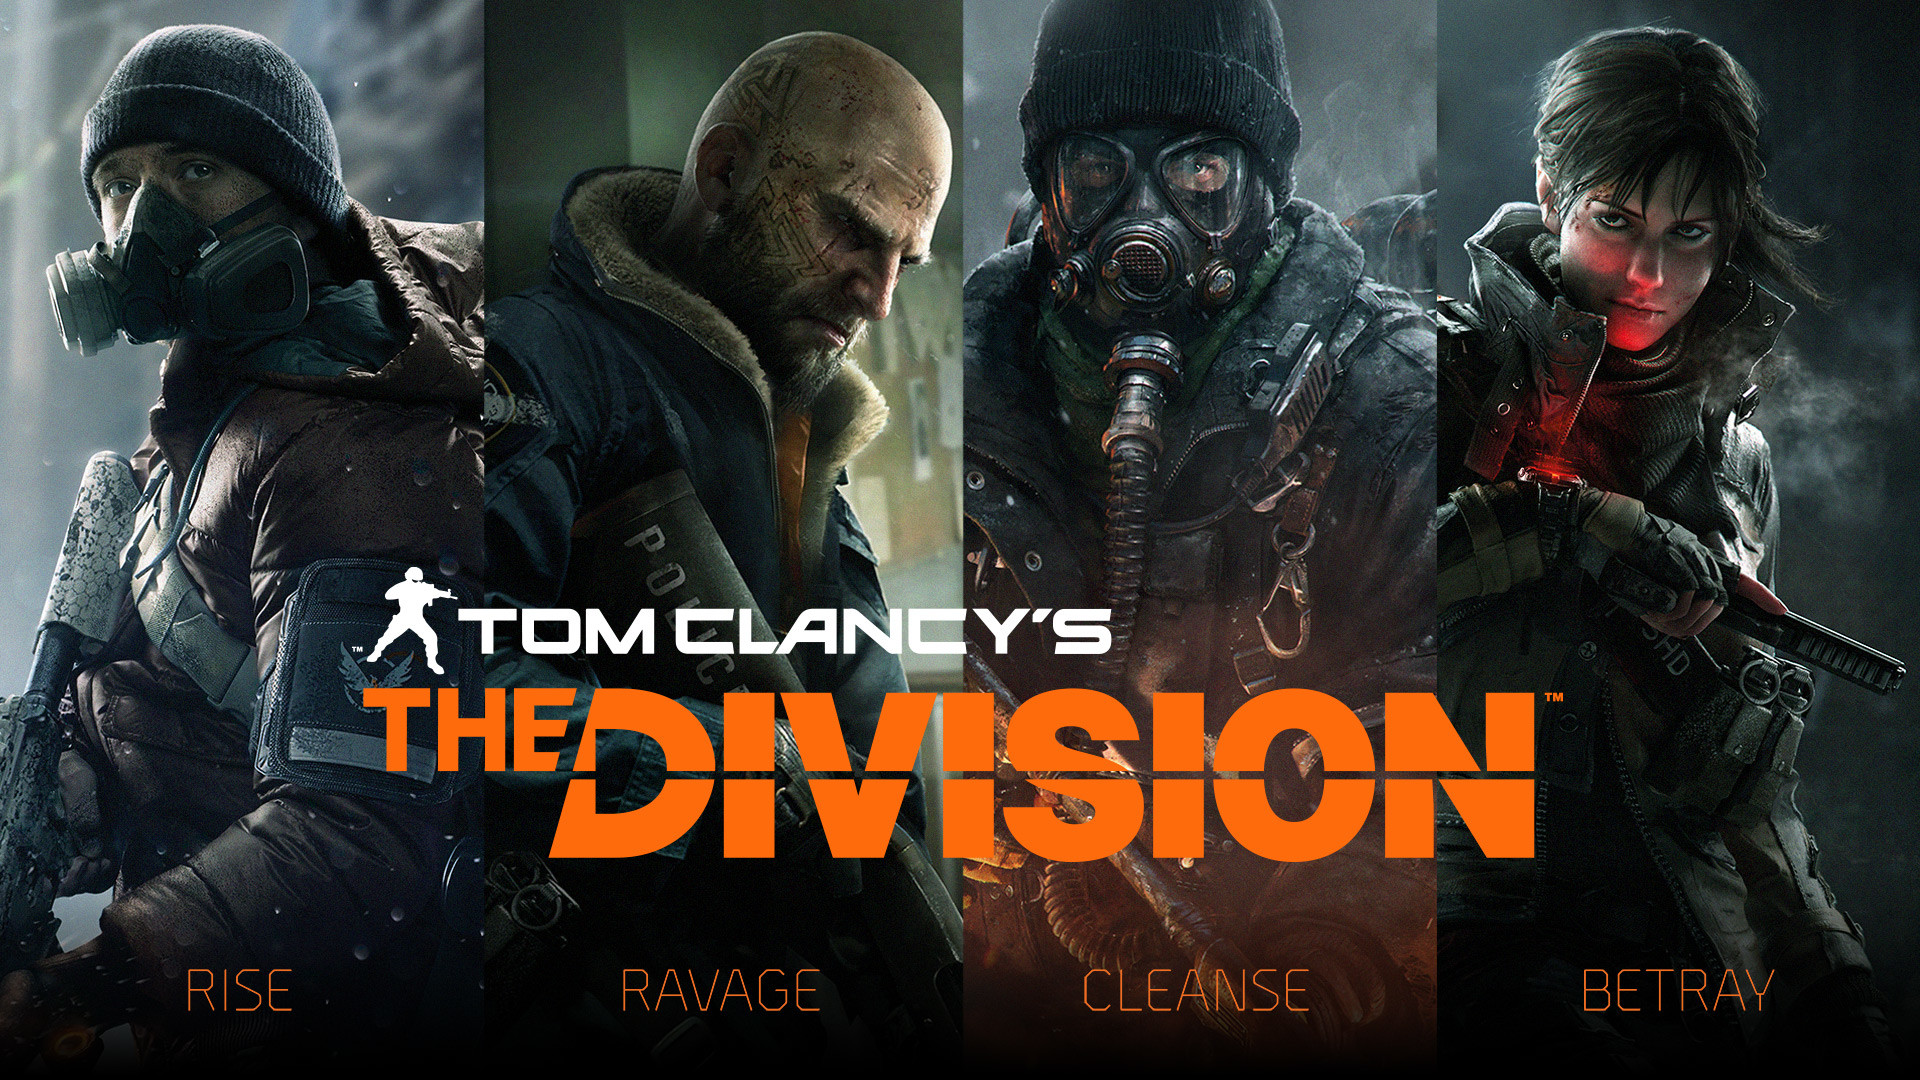 Tom clancys the division poster – 1080 x 1920 HD Backgrounds, High Definition wallpapers for